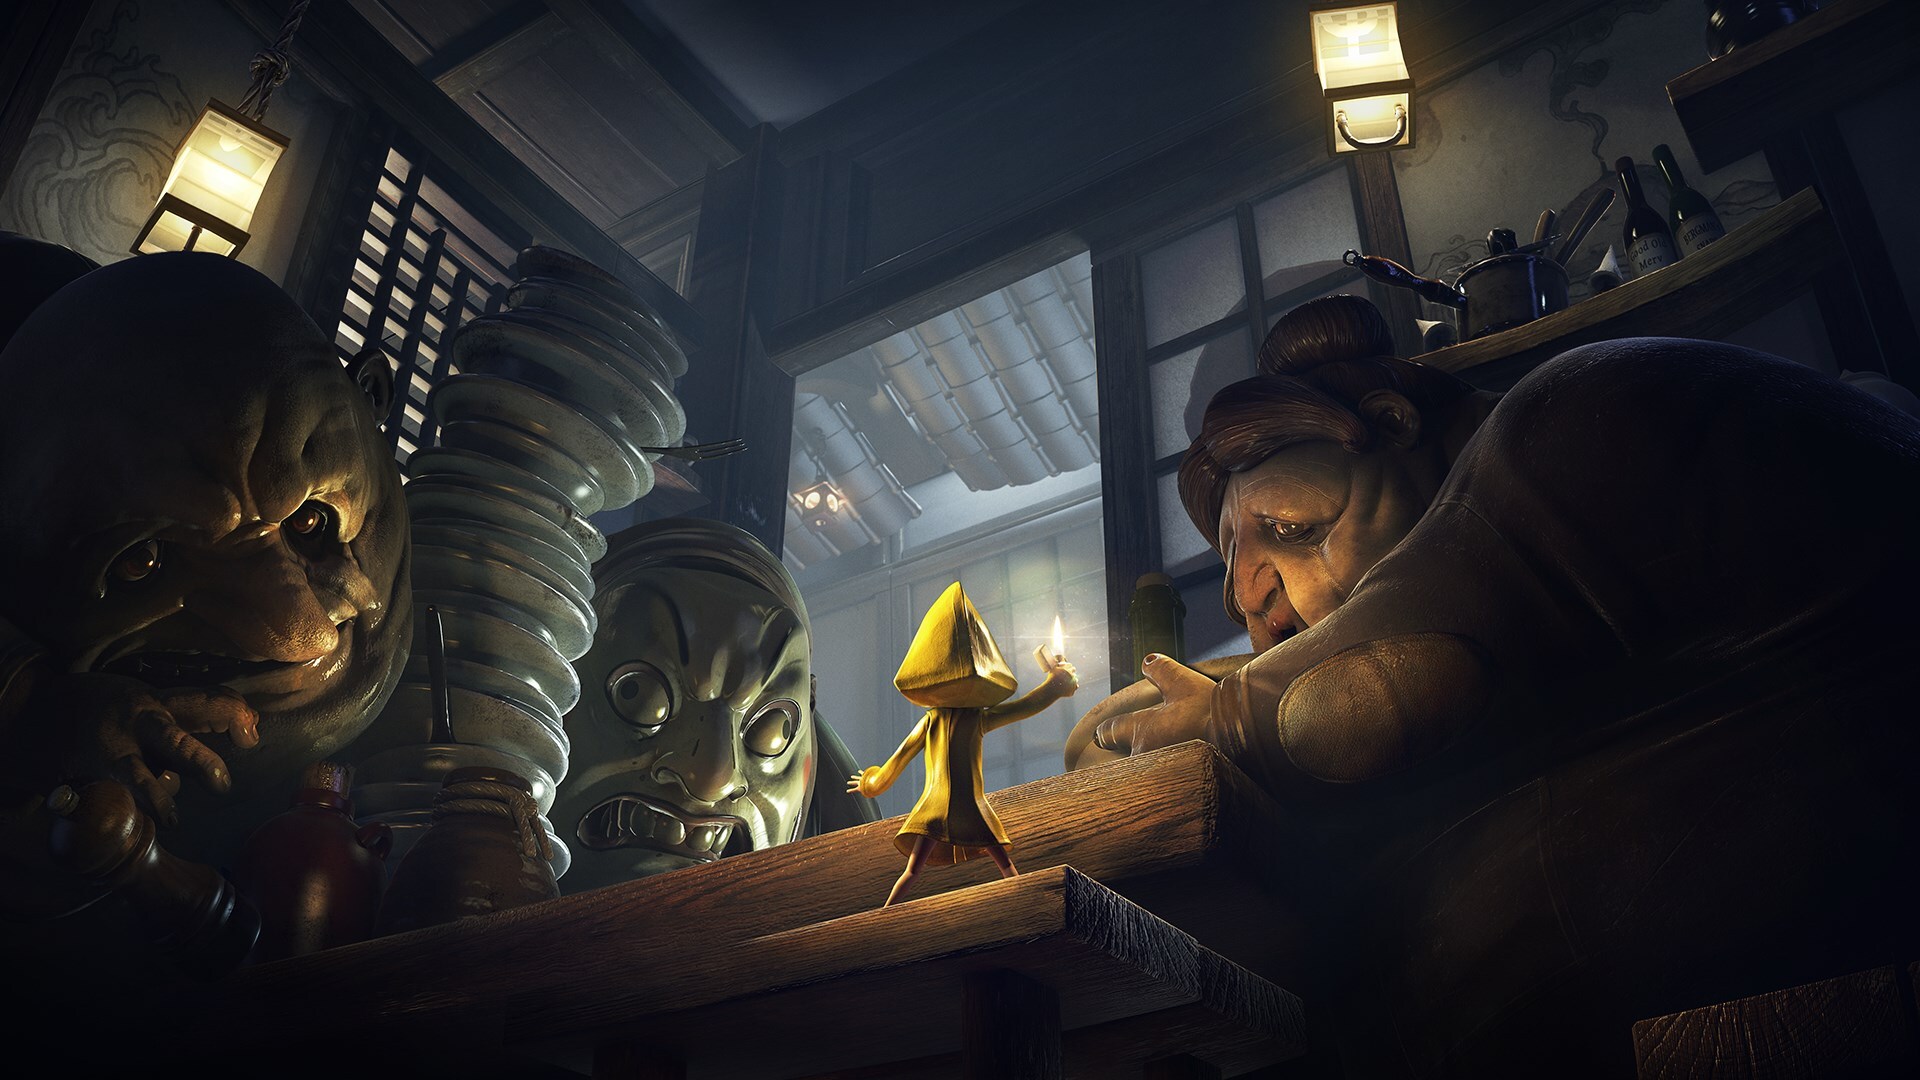 Little Nightmares arrives on mobile devices: chilling adventure